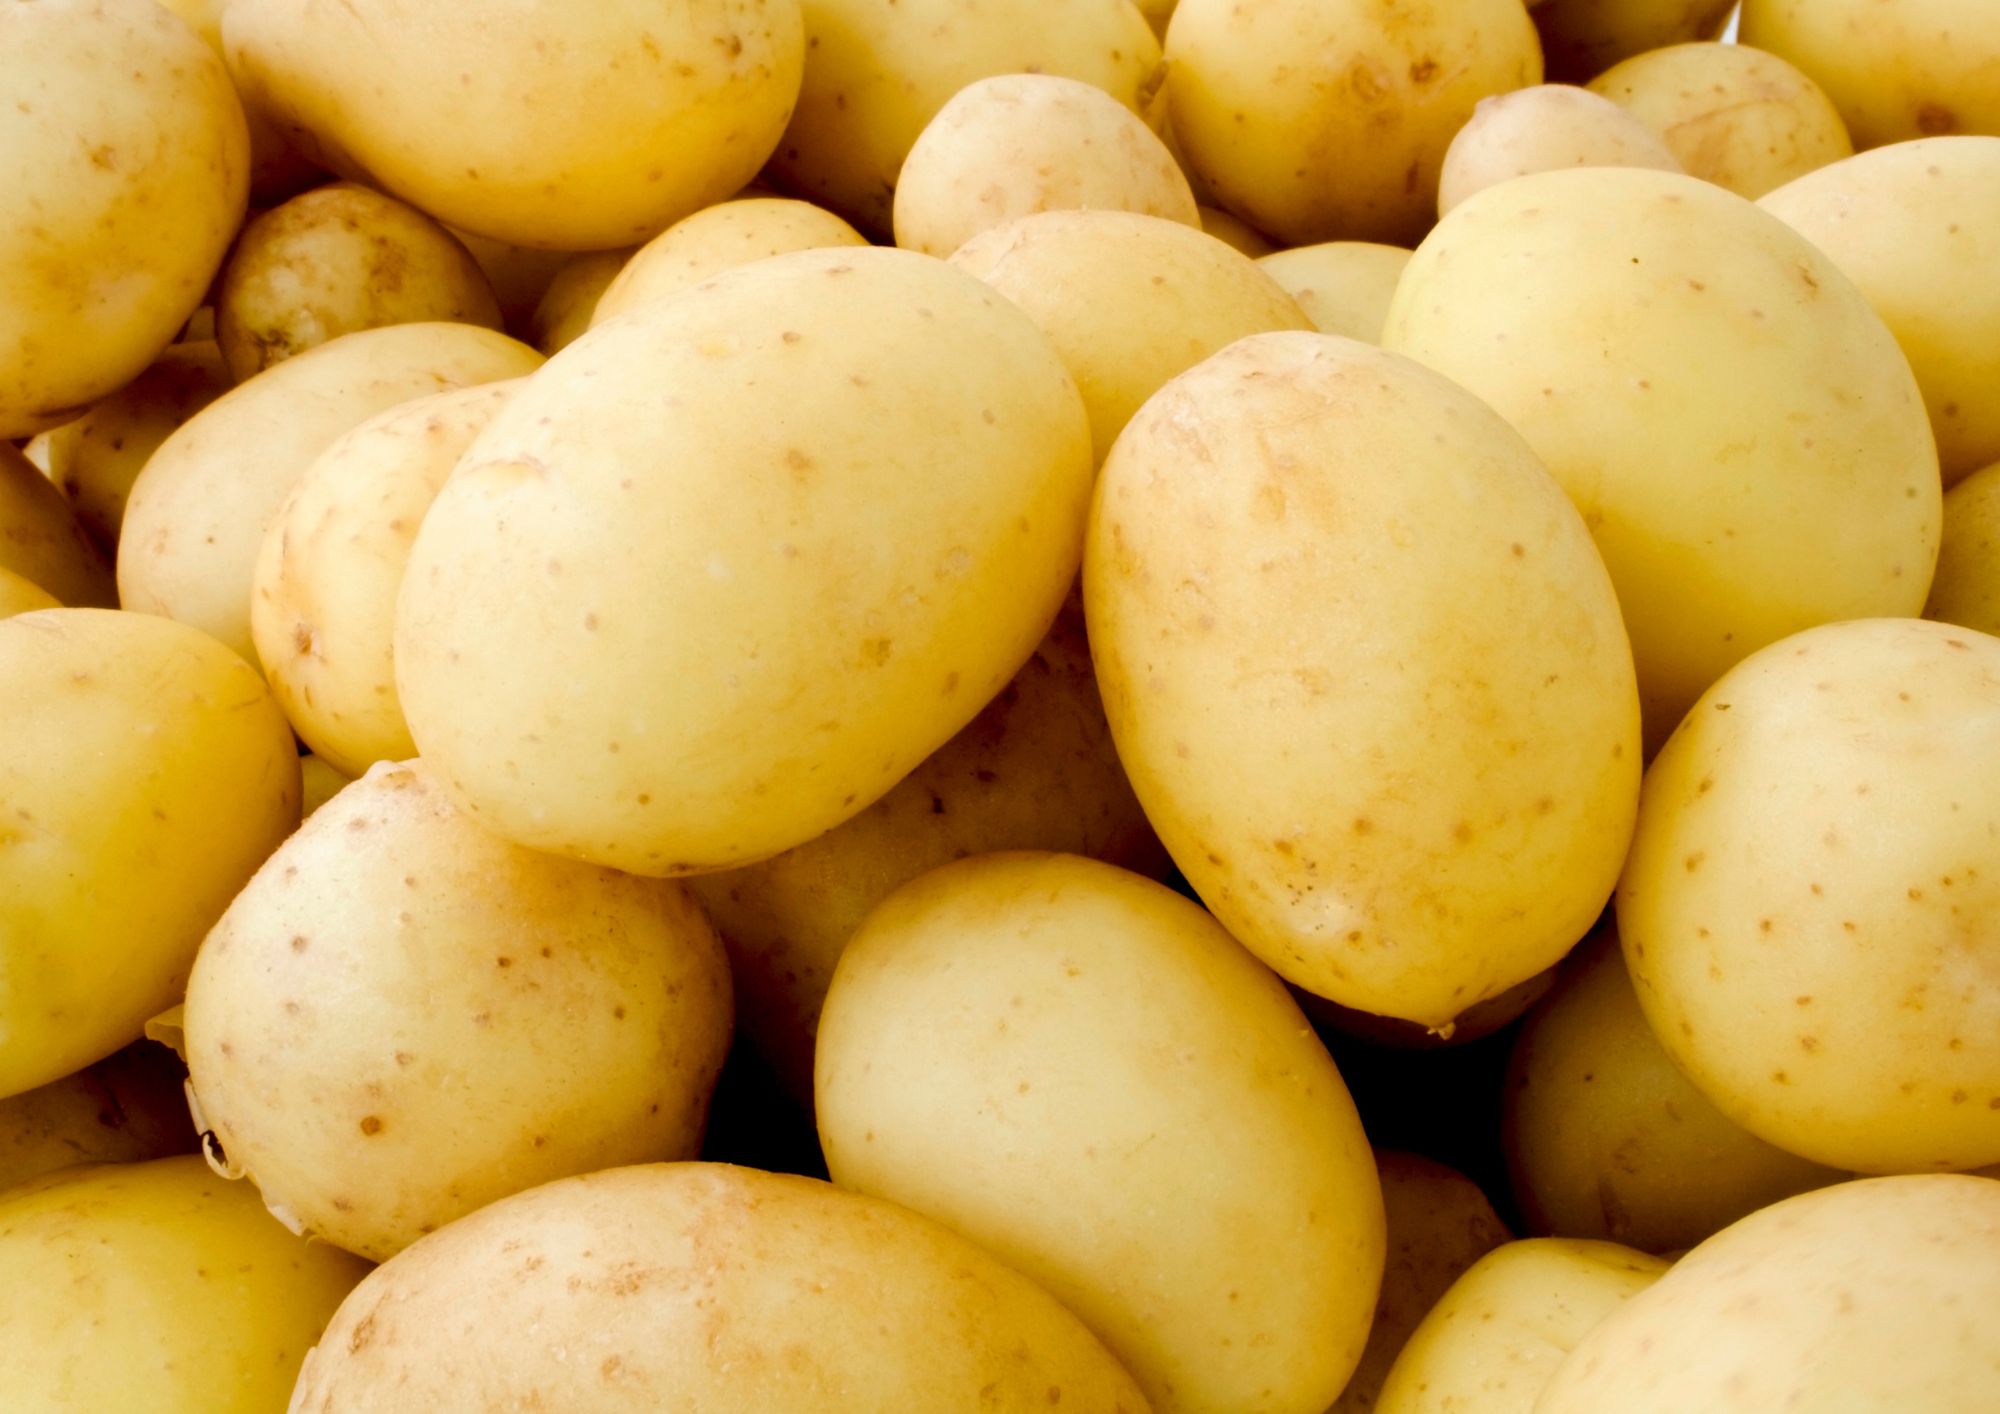 What do Italians think about potatoes?